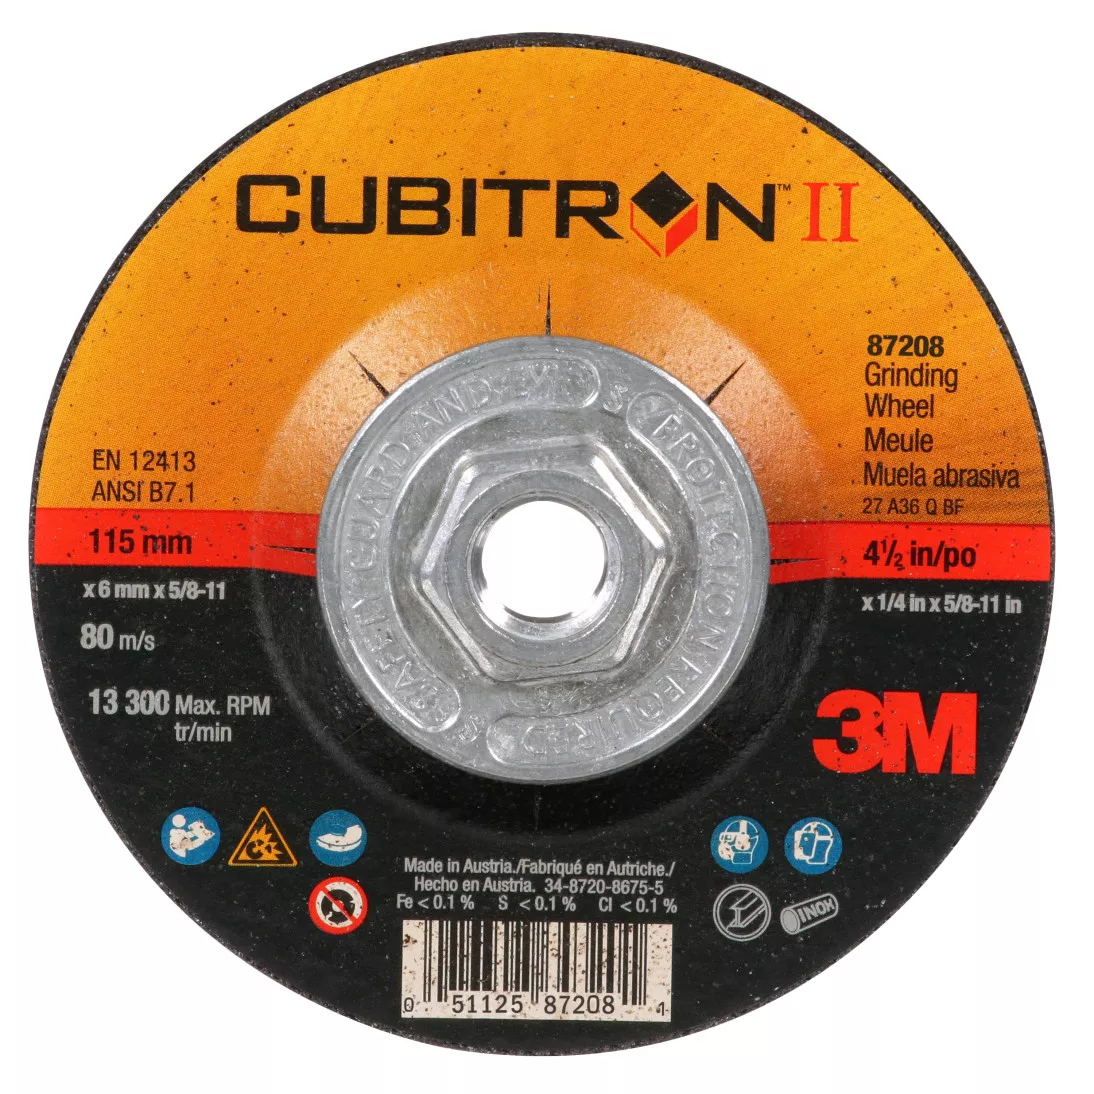 3M™ Cubitron™ II Depressed Center Grinding Wheel, 87208, Type 27 Quick
Change, 4-1/2 in x 1/4 in x 5/8 in-11, 10/case, Single Pack